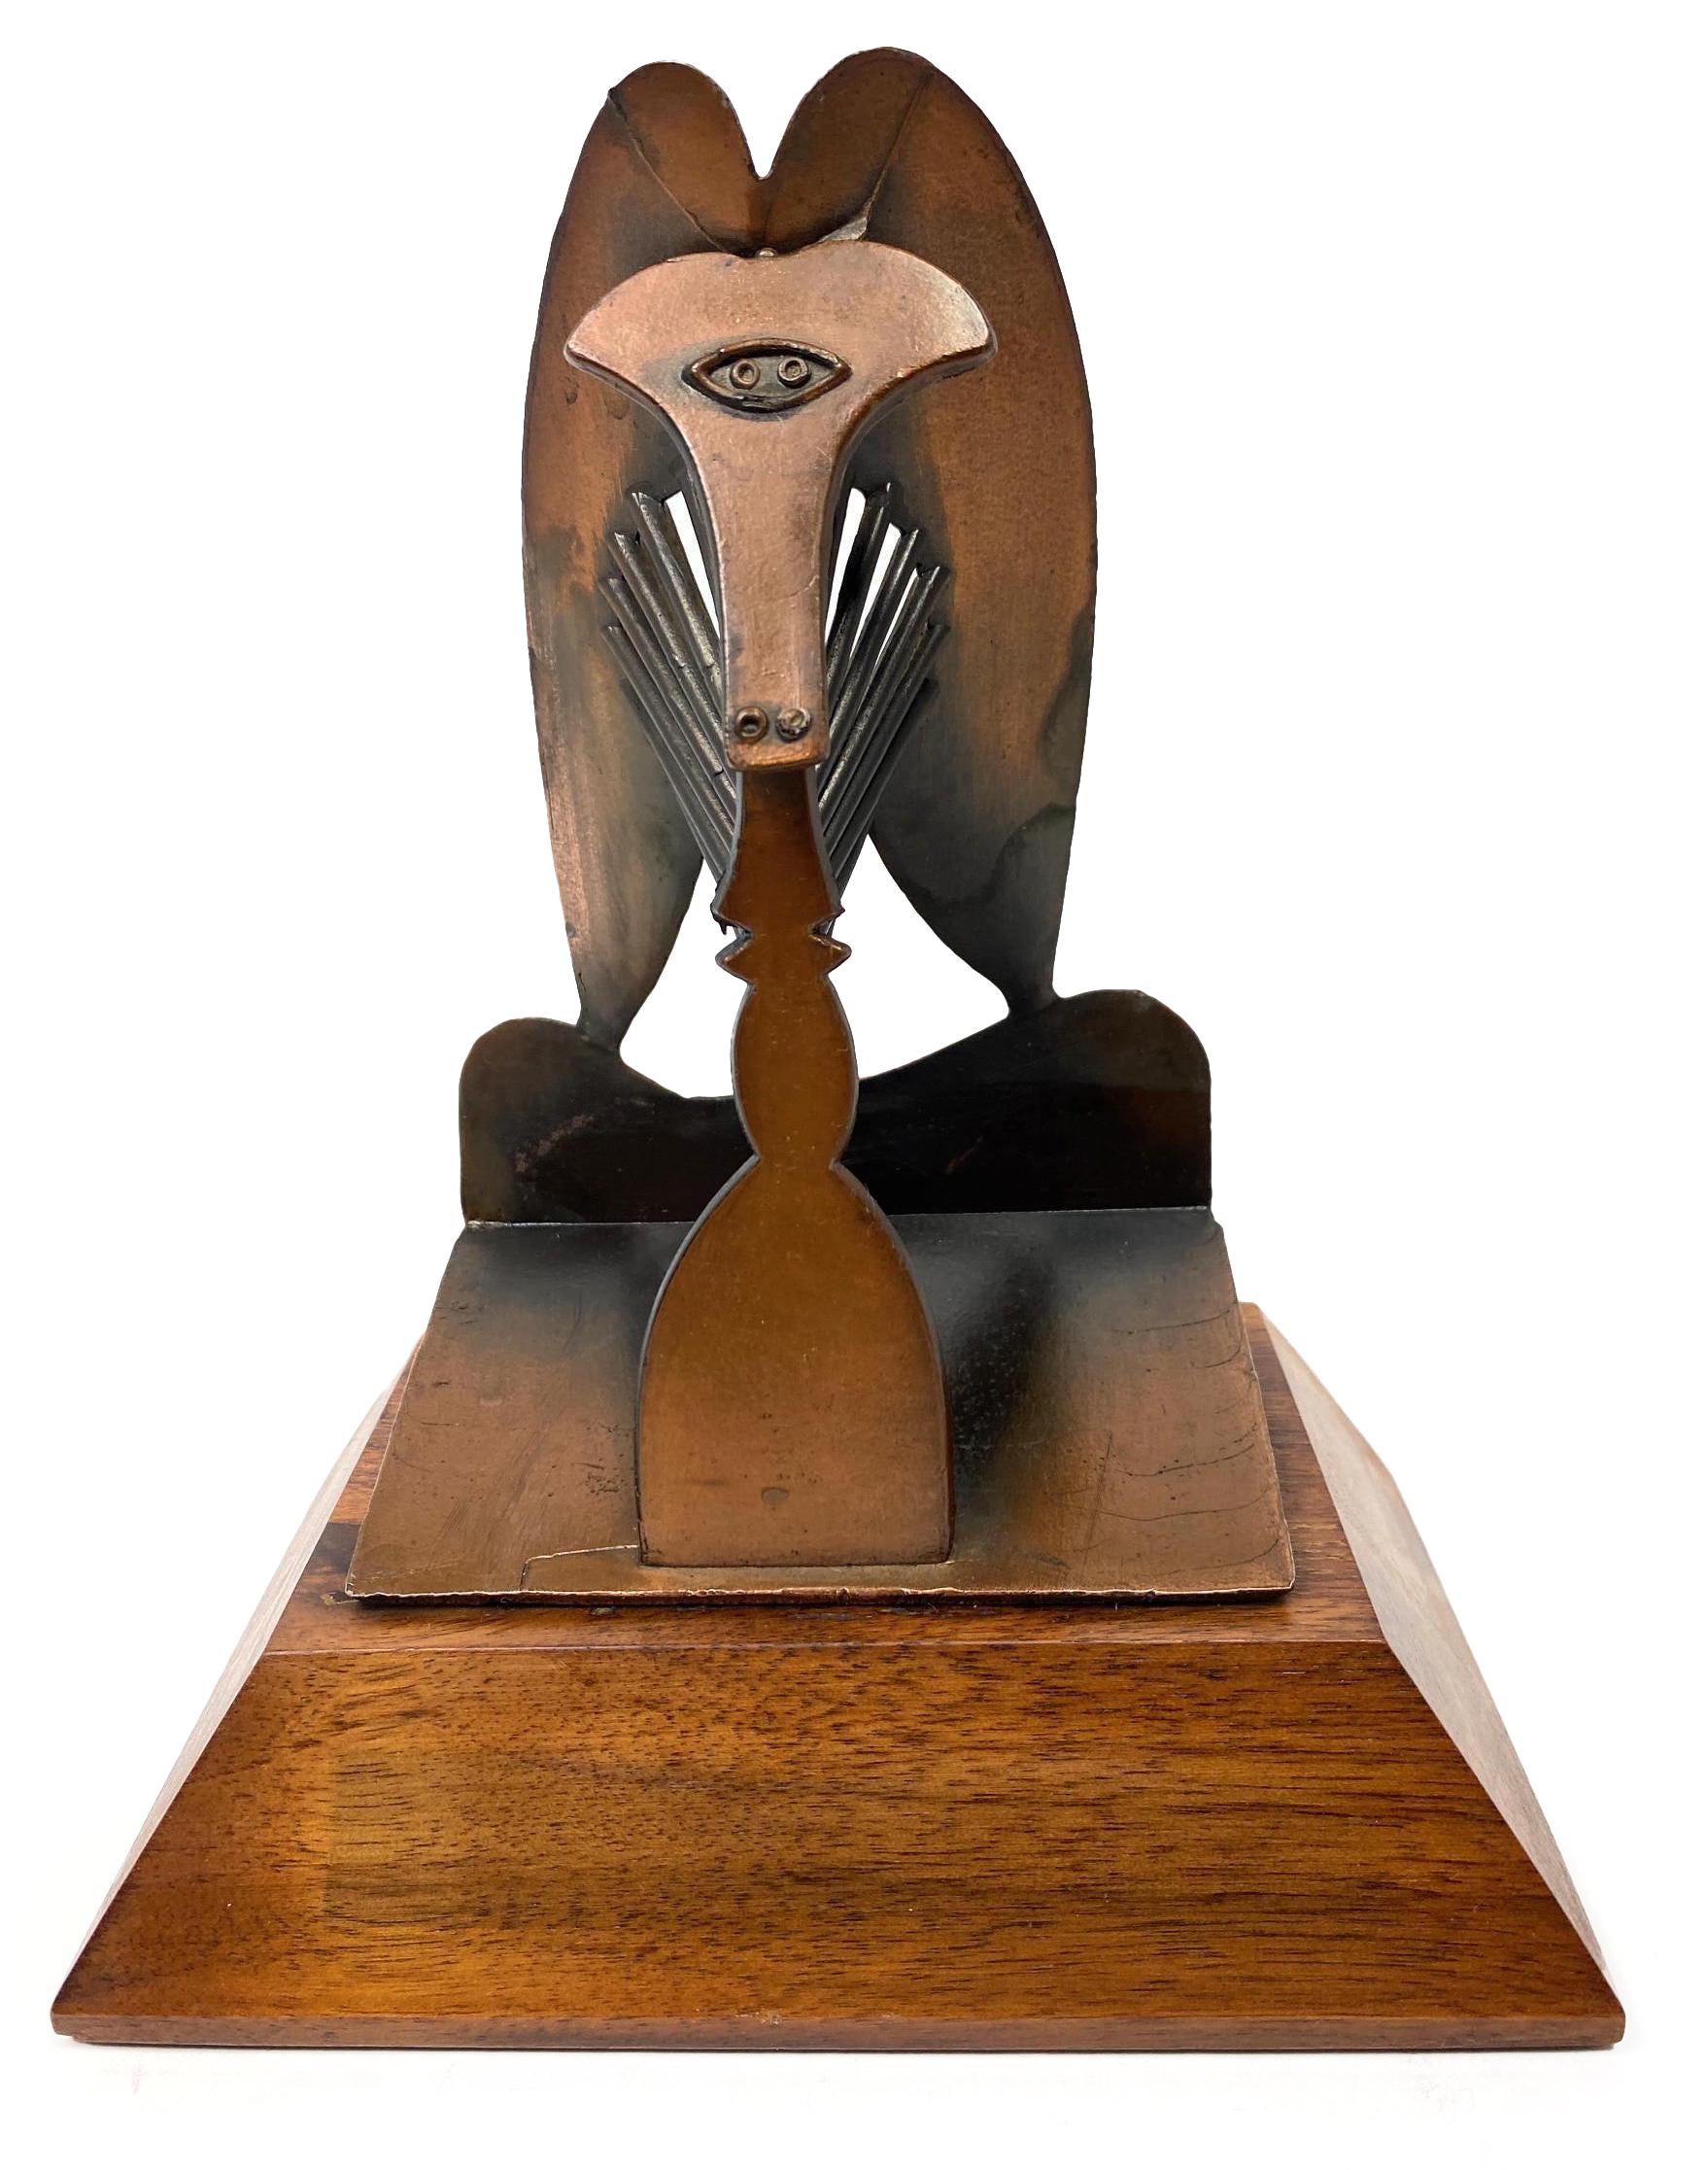 Pablo Picasso Abstract Sculpture - "Untitled (Maquette of the Chicago Sculpture)" by Picasso